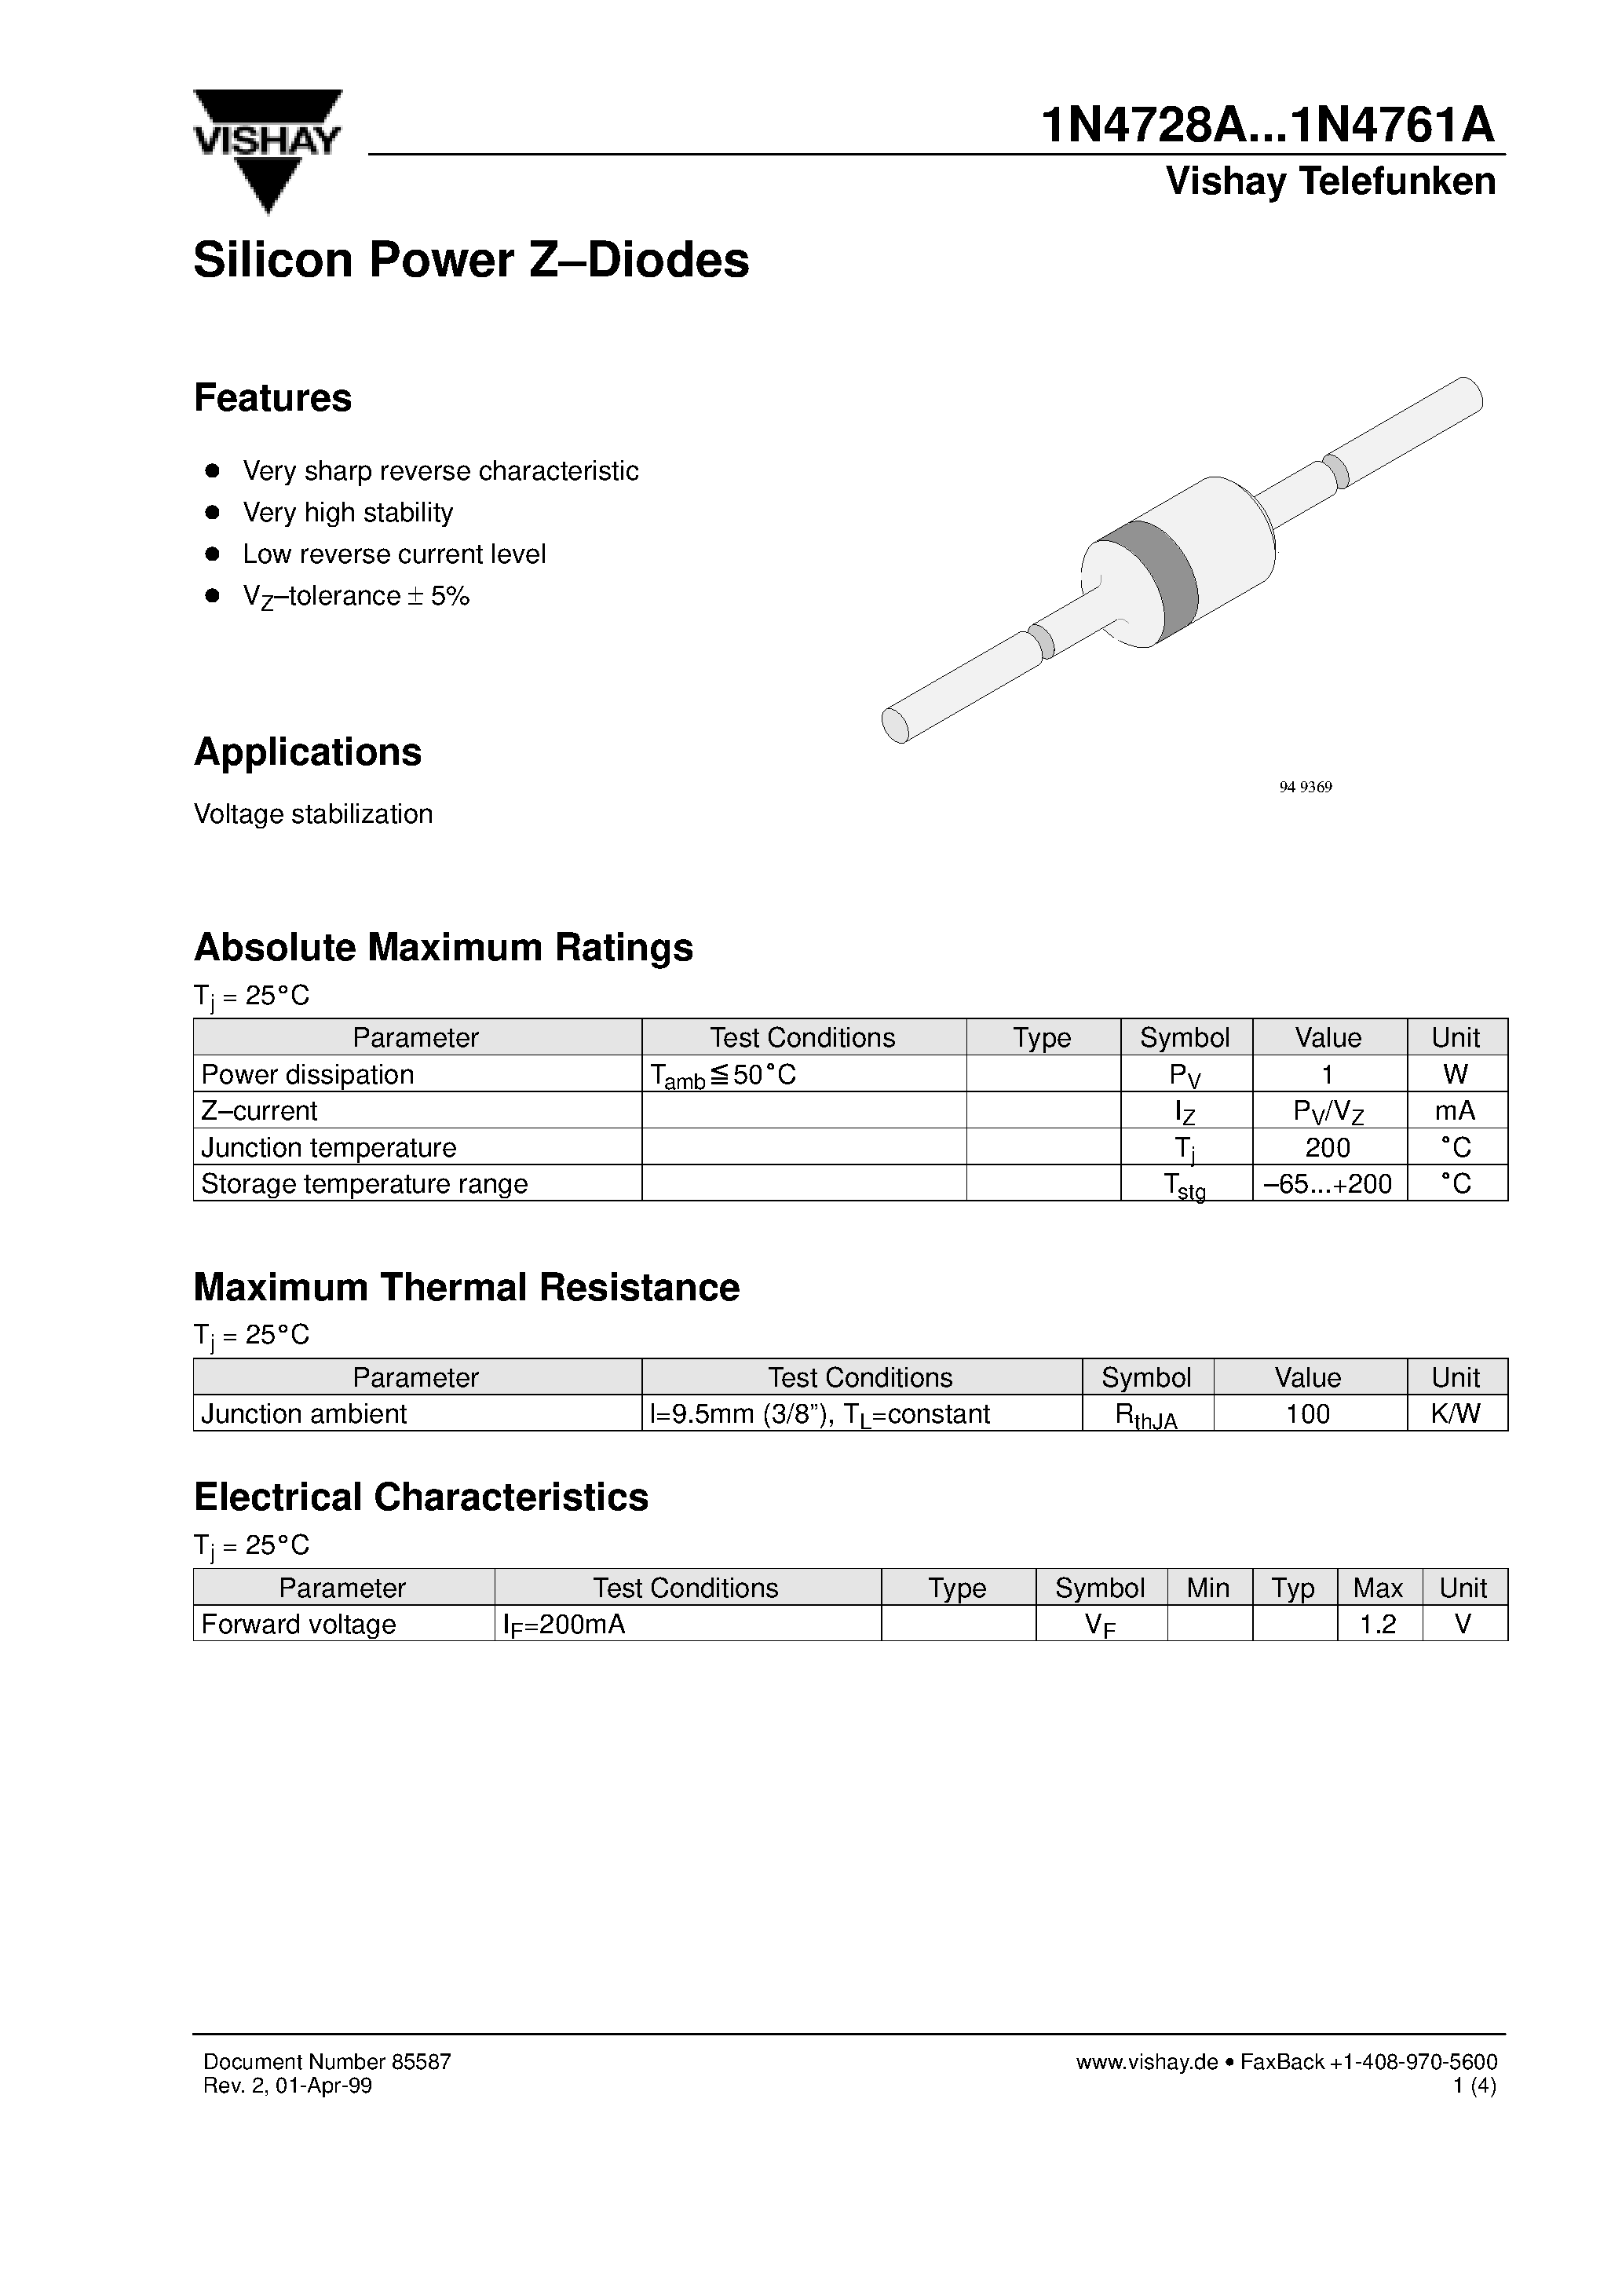 Даташит 1N4728A - Silicon Power Z-Diodes страница 1